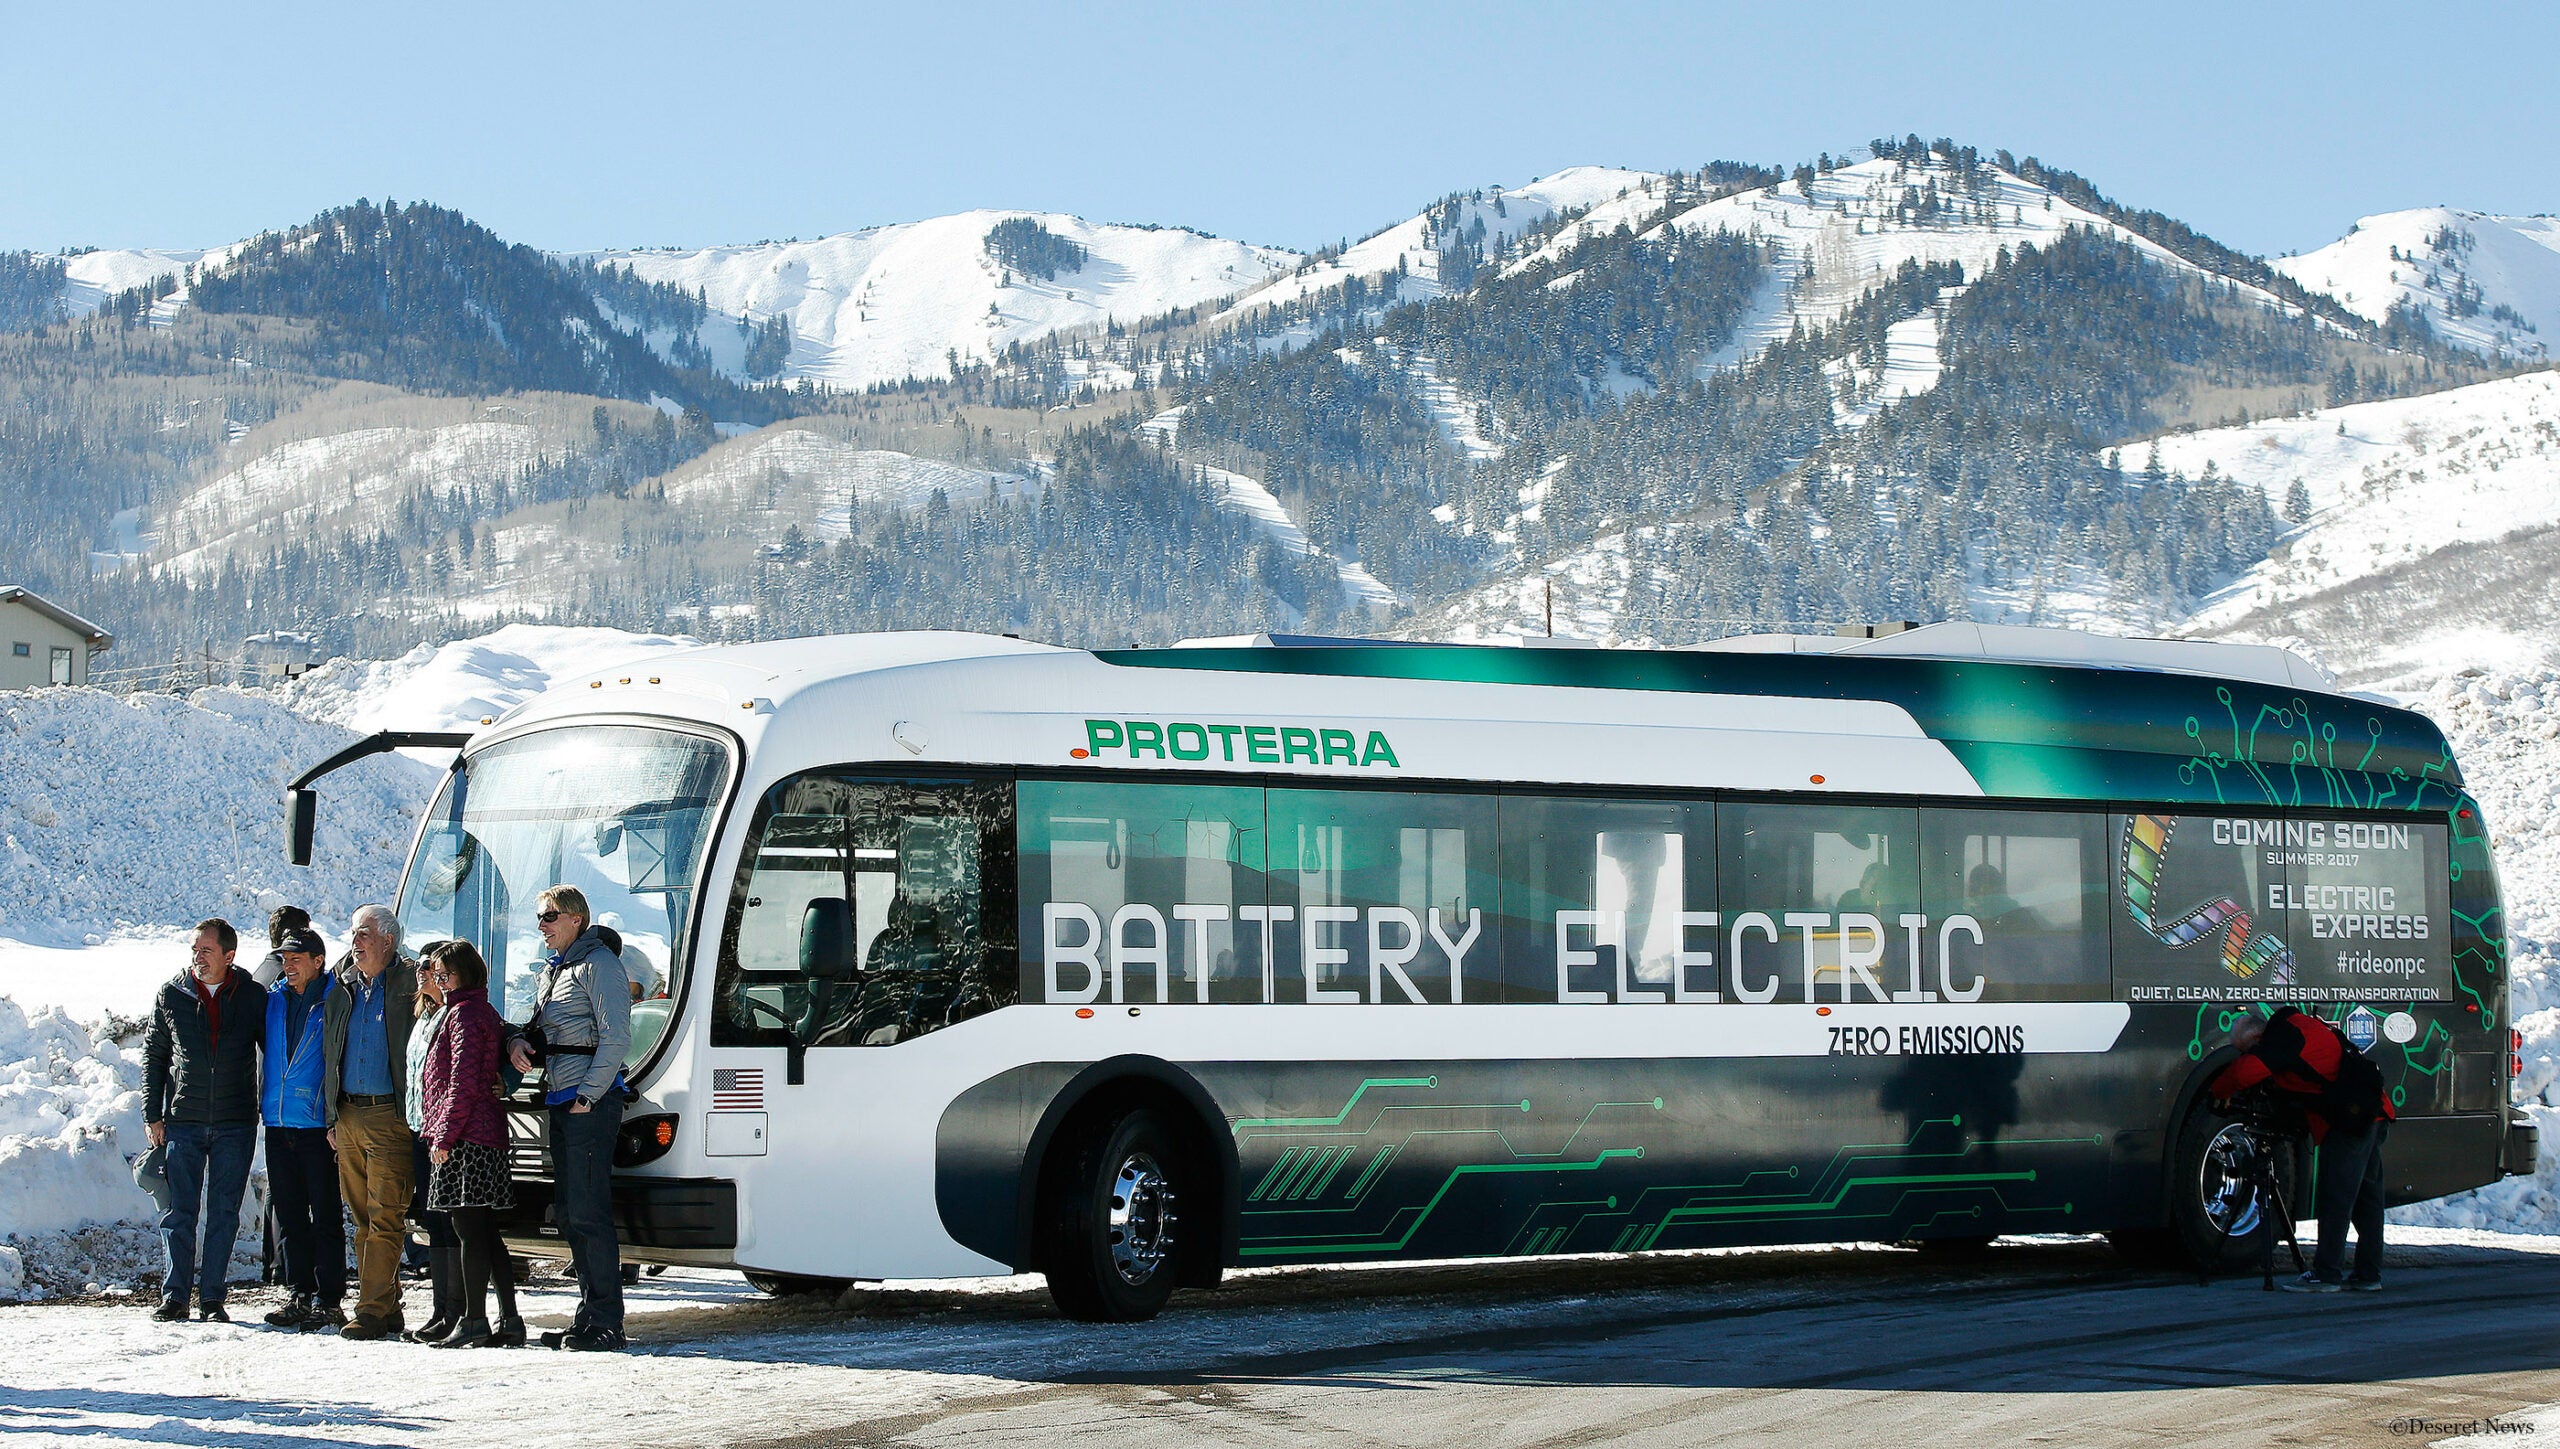 Proterra is one of several companies manufacturing electric buses in California.